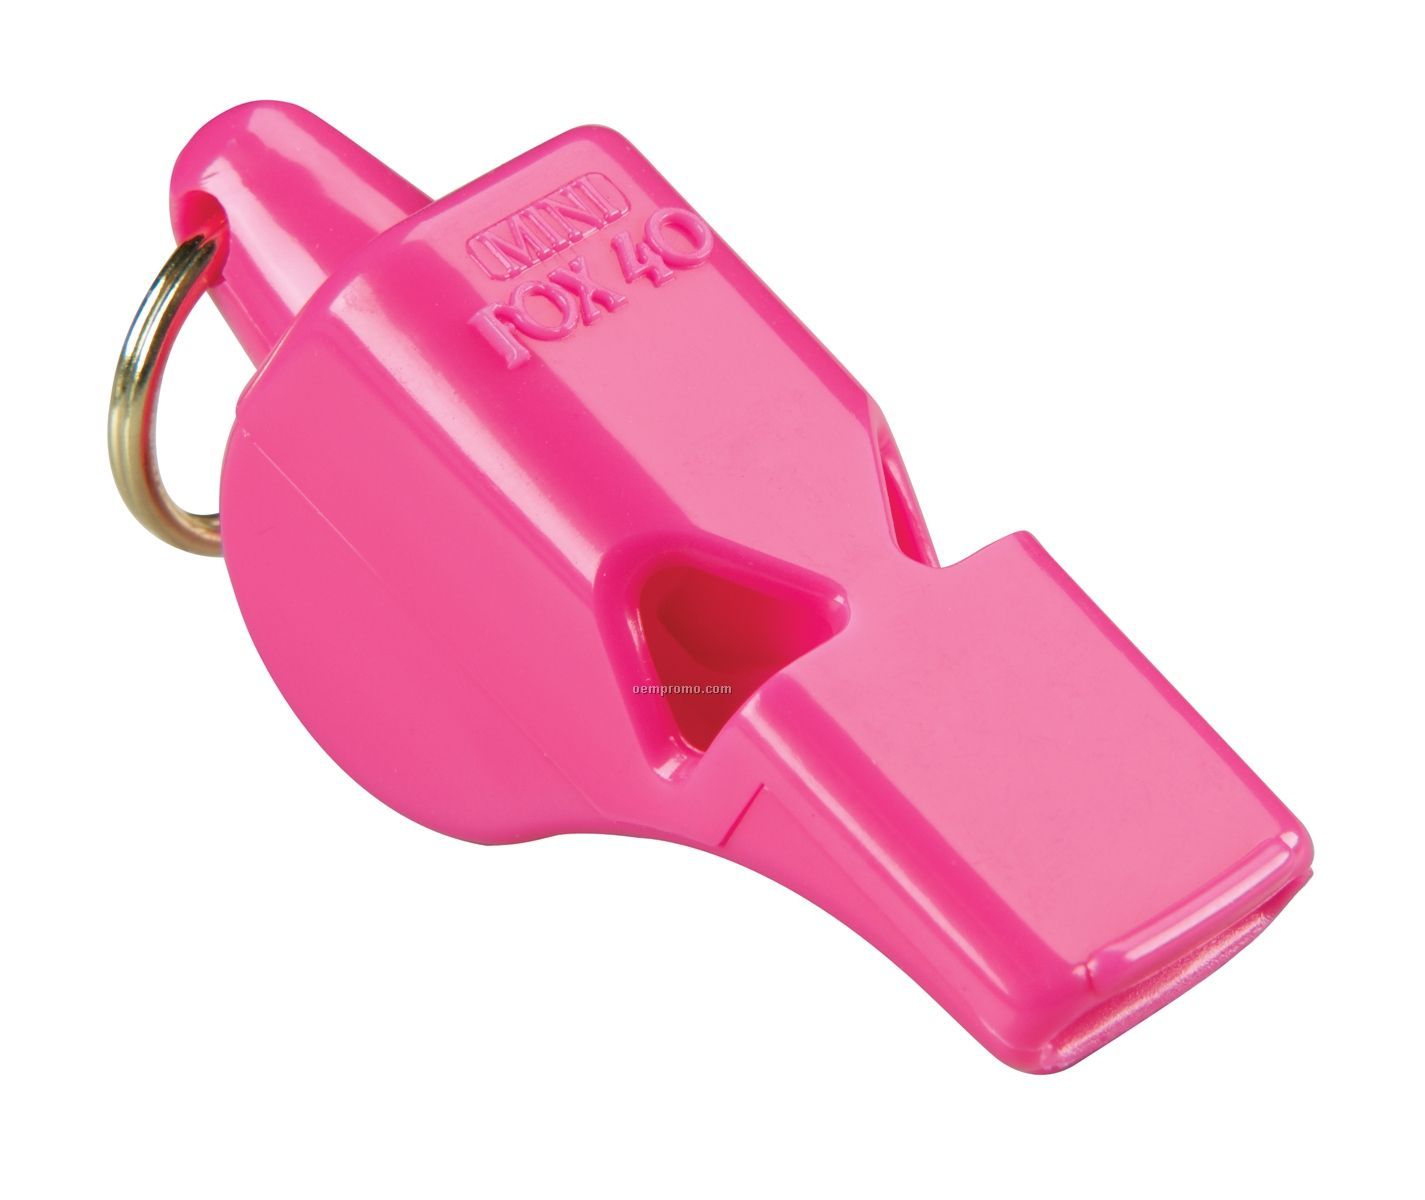 P4 Pealess Whistle